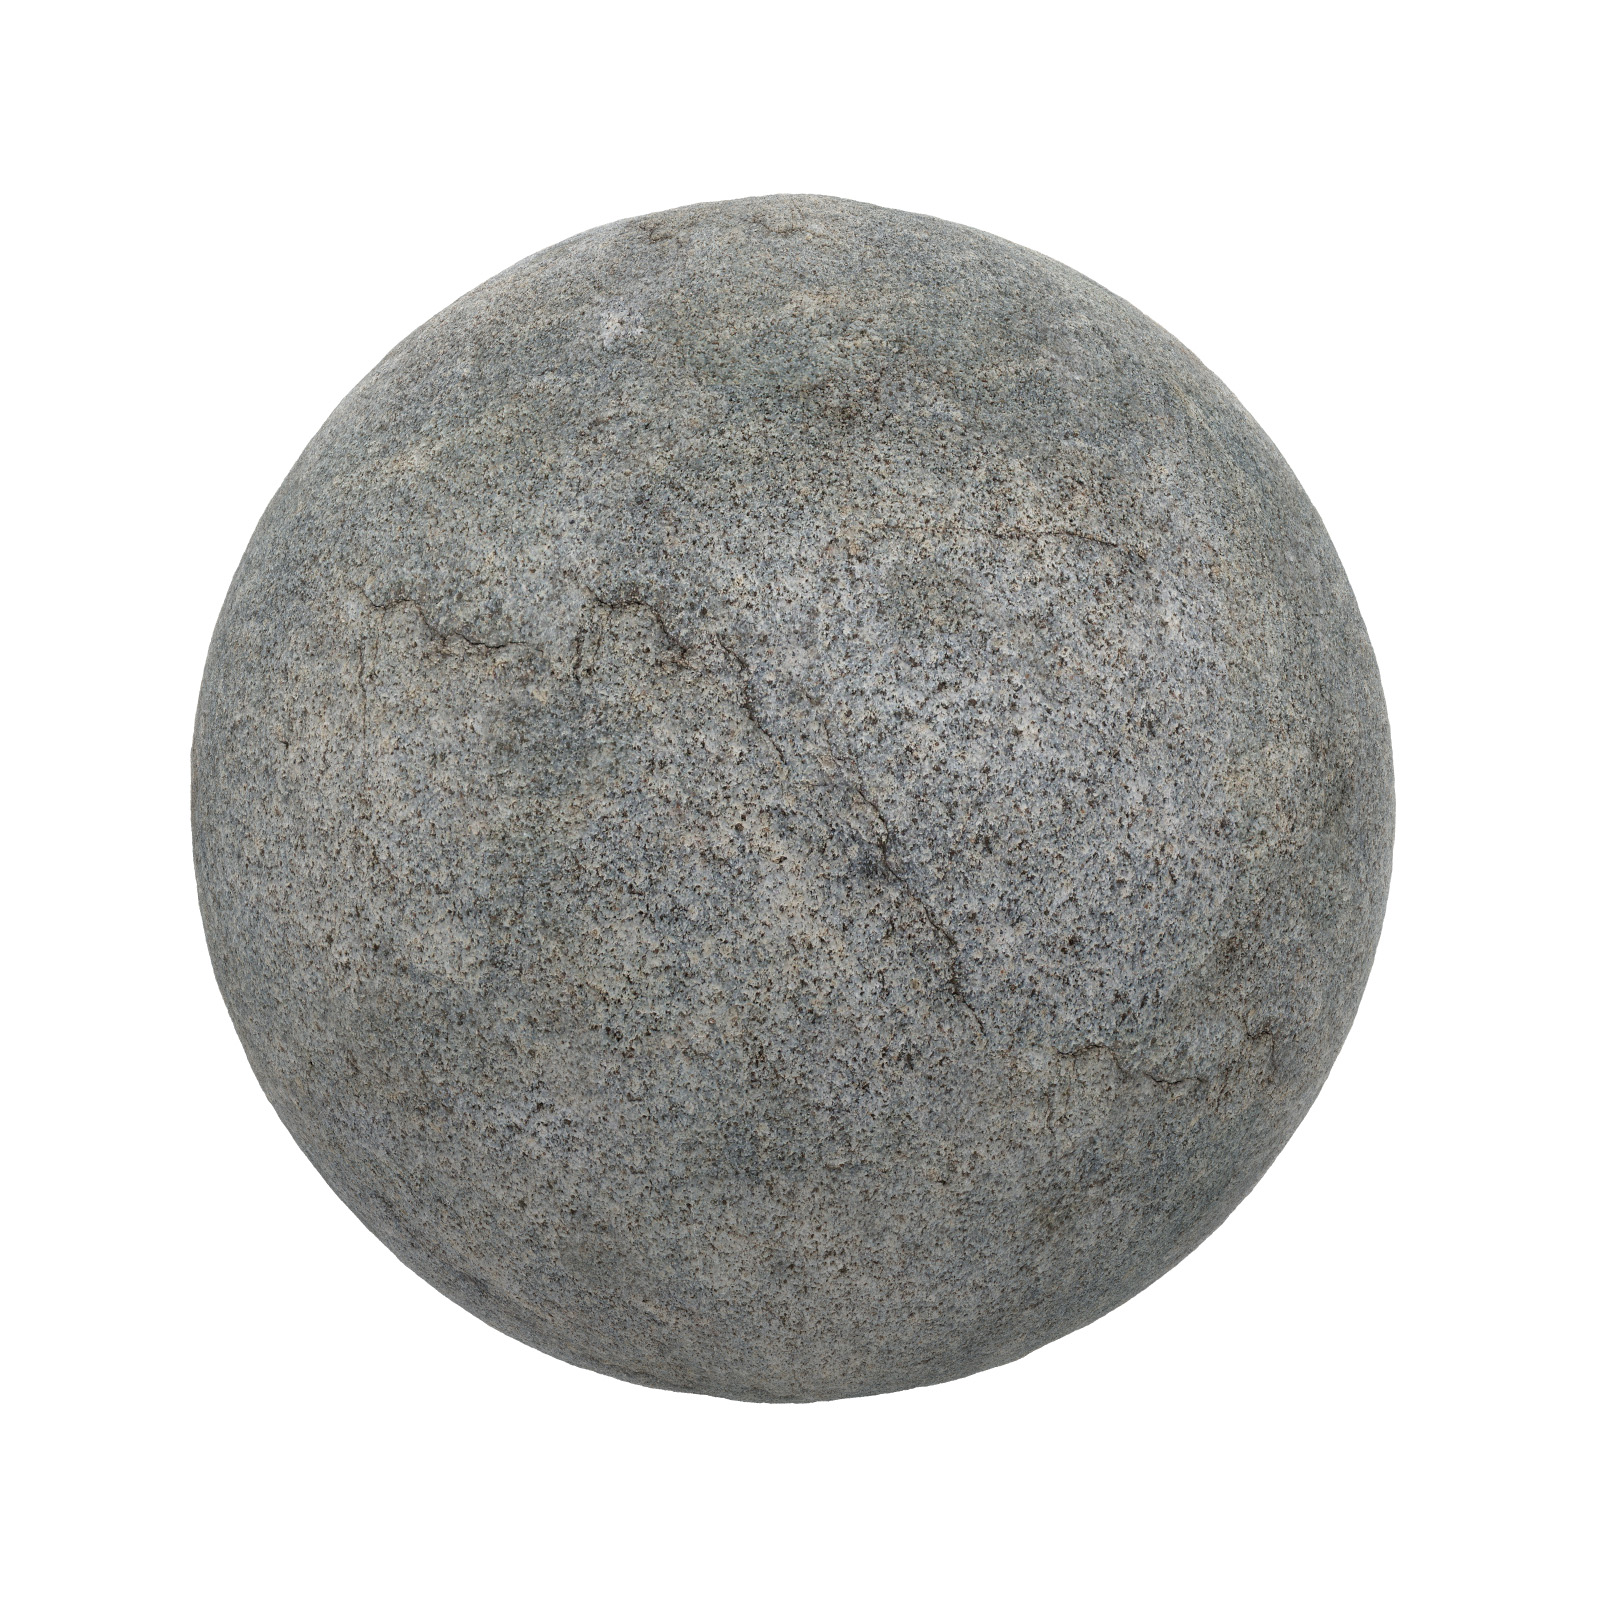 TEXTURES – STONES – CGAxis PBR Colection Vol 1 Stones – rough grey stone 1 - thumbnail 1